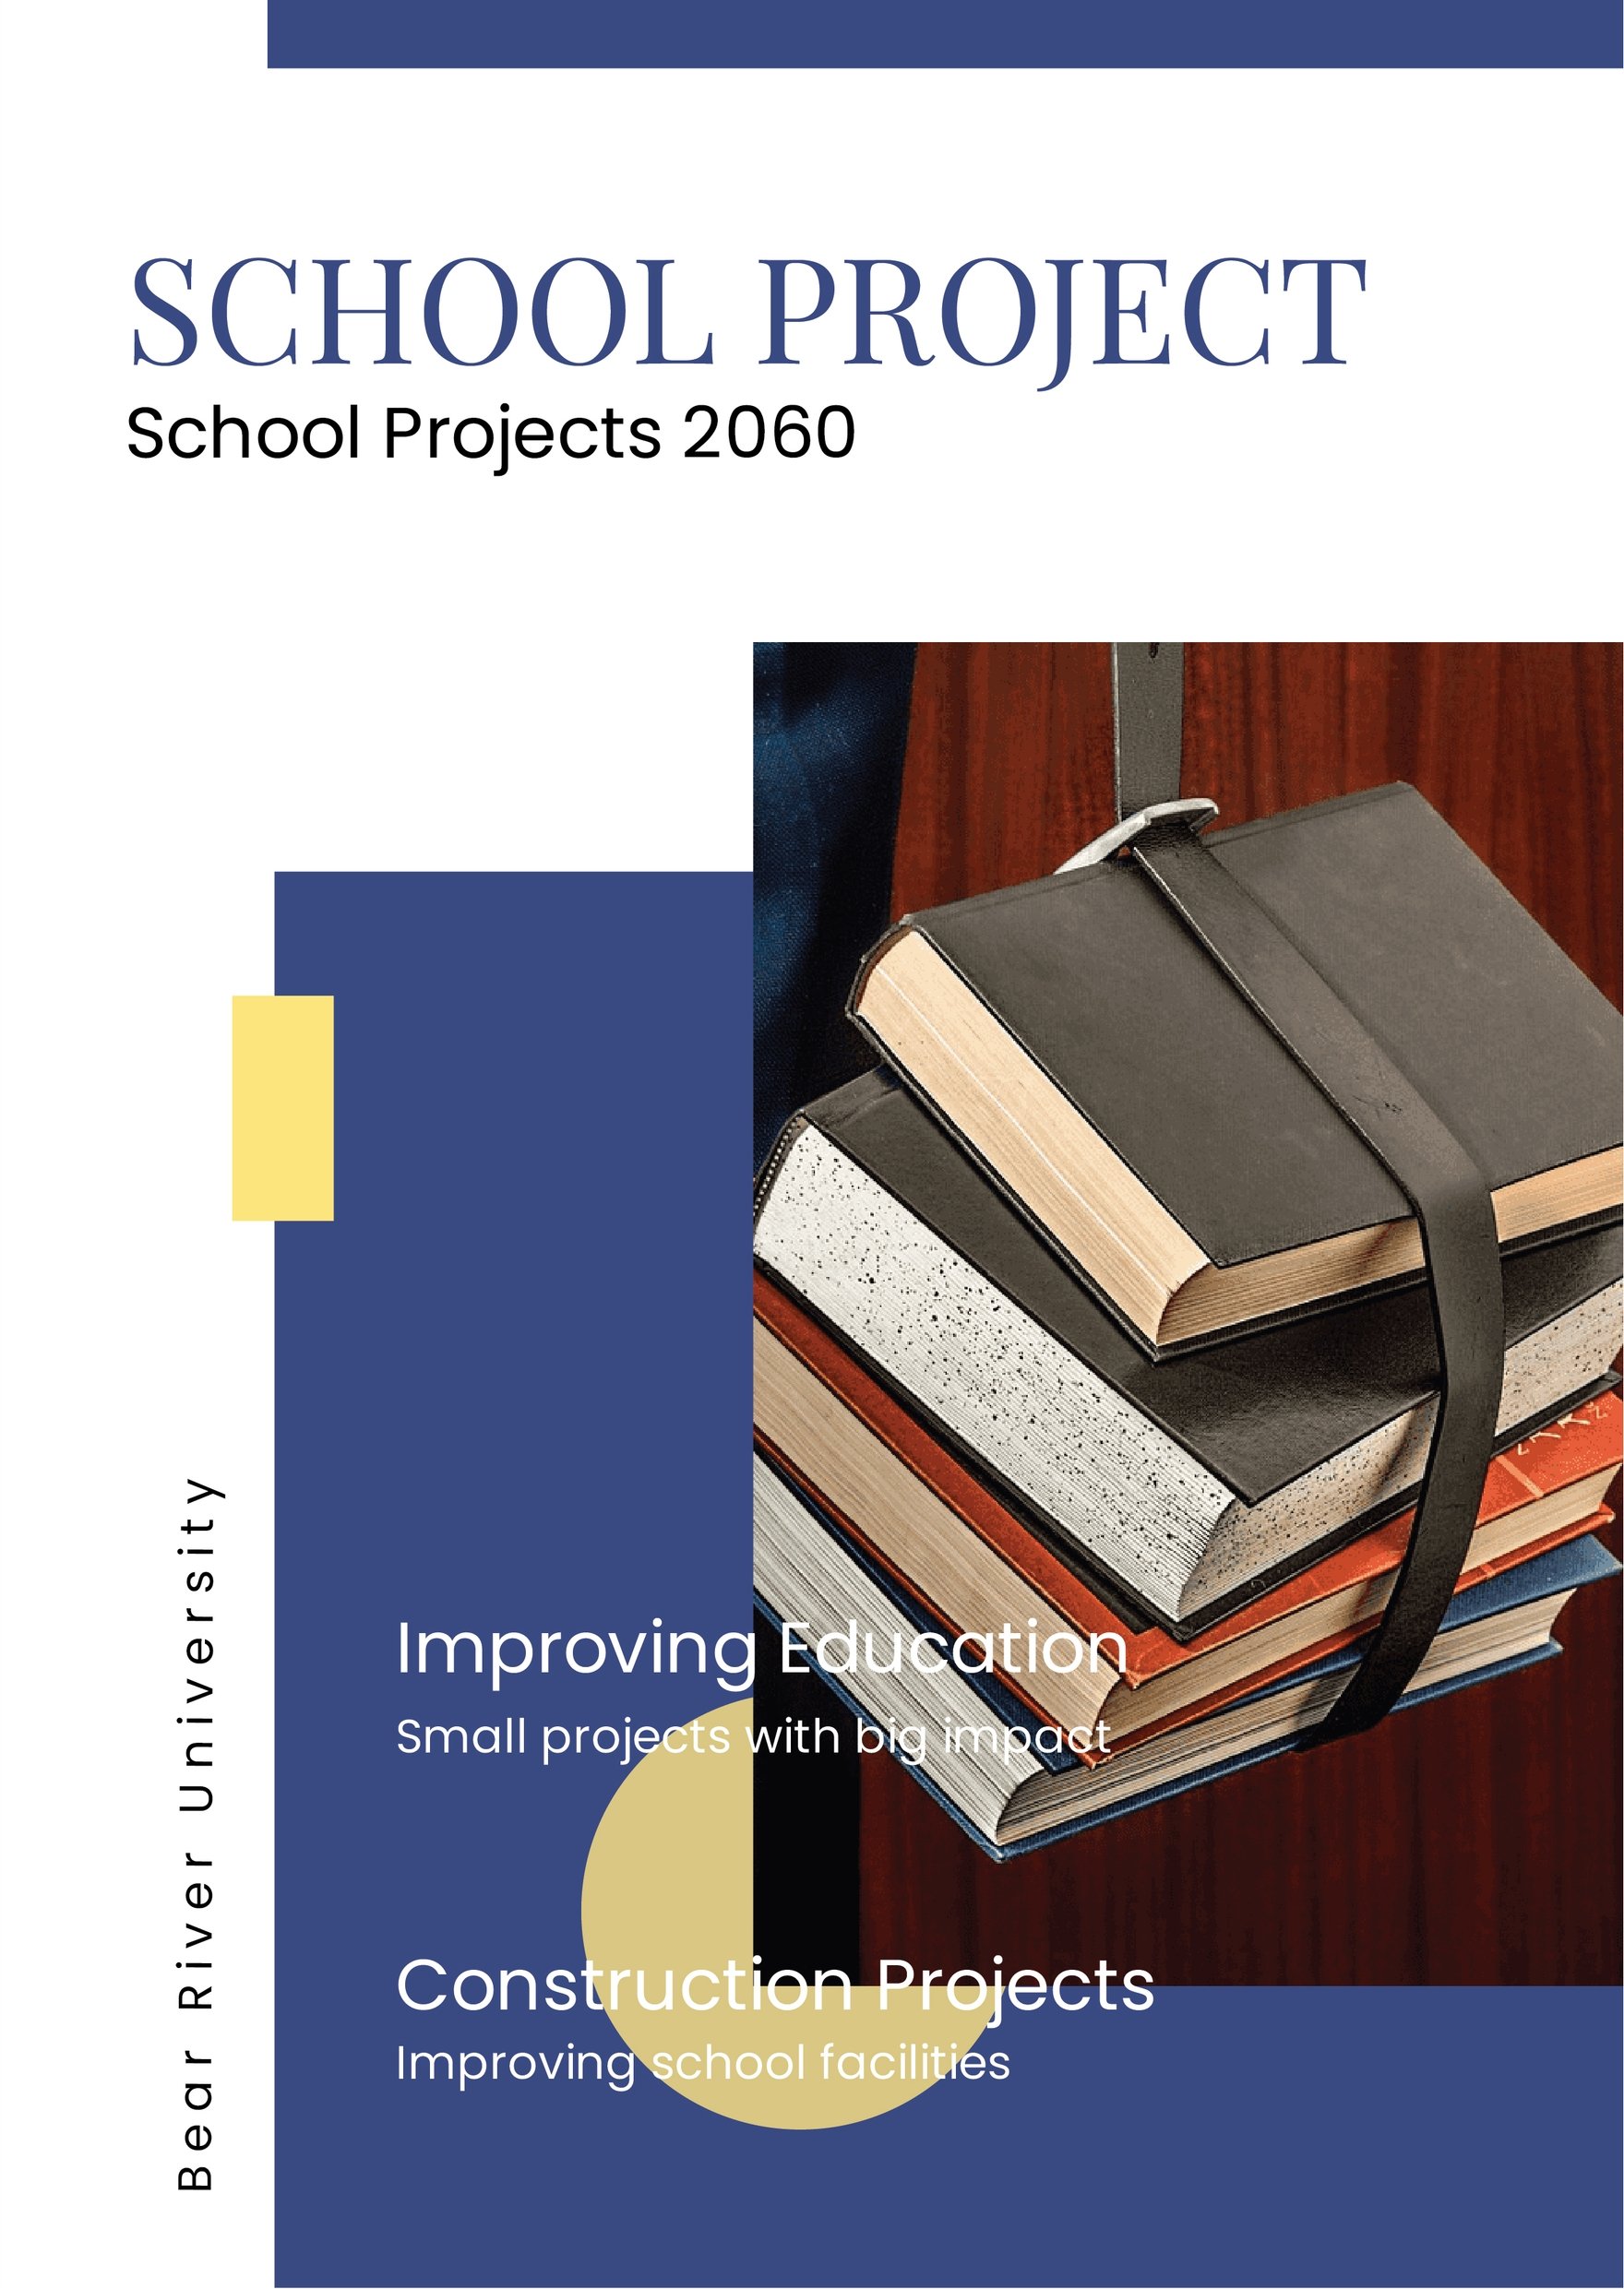 school-project-booklet-template-in-illustrator-photoshop-pages